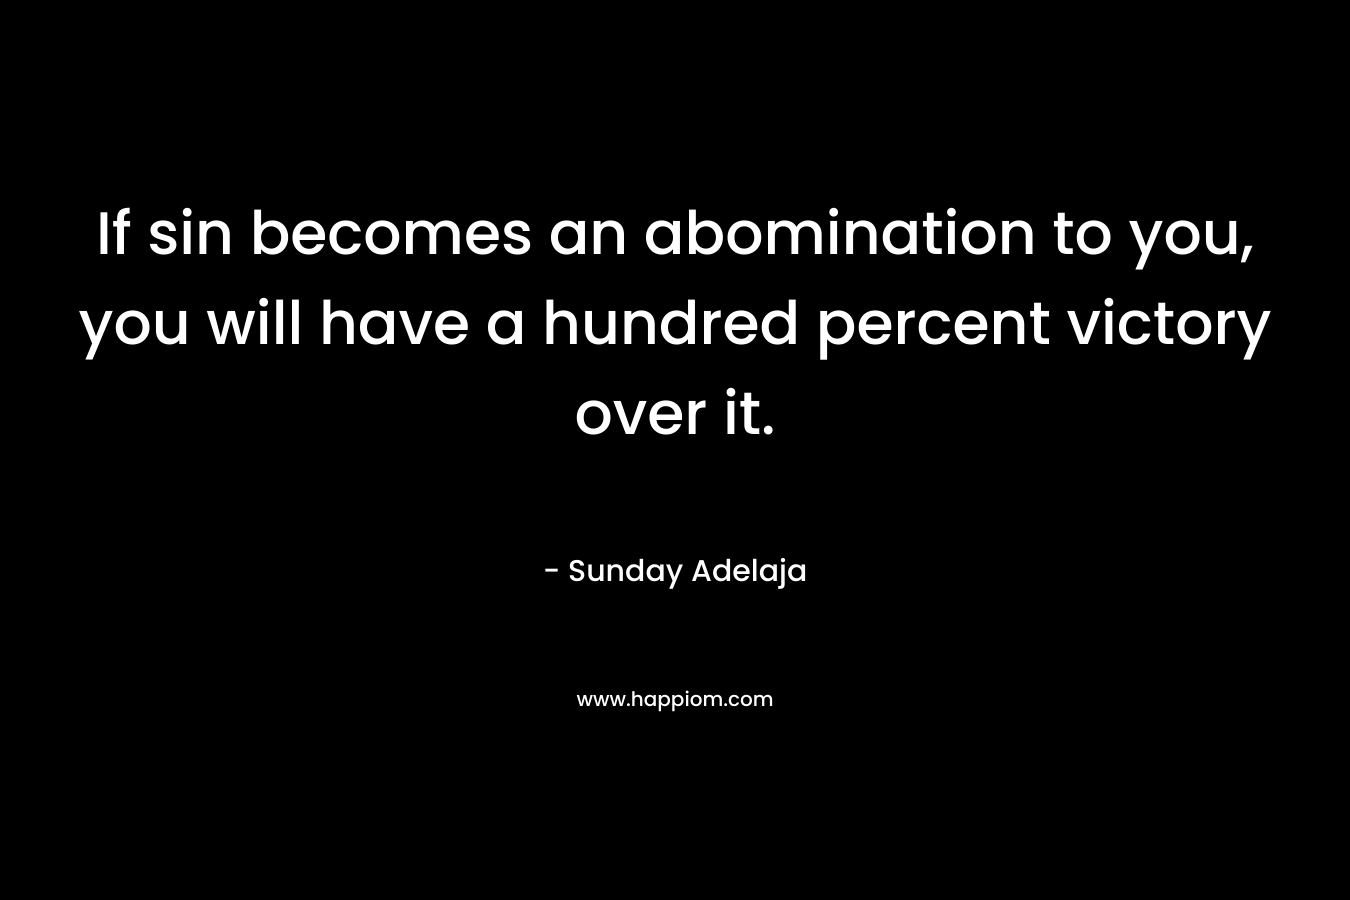 If sin becomes an abomination to you, you will have a hundred percent victory over it.